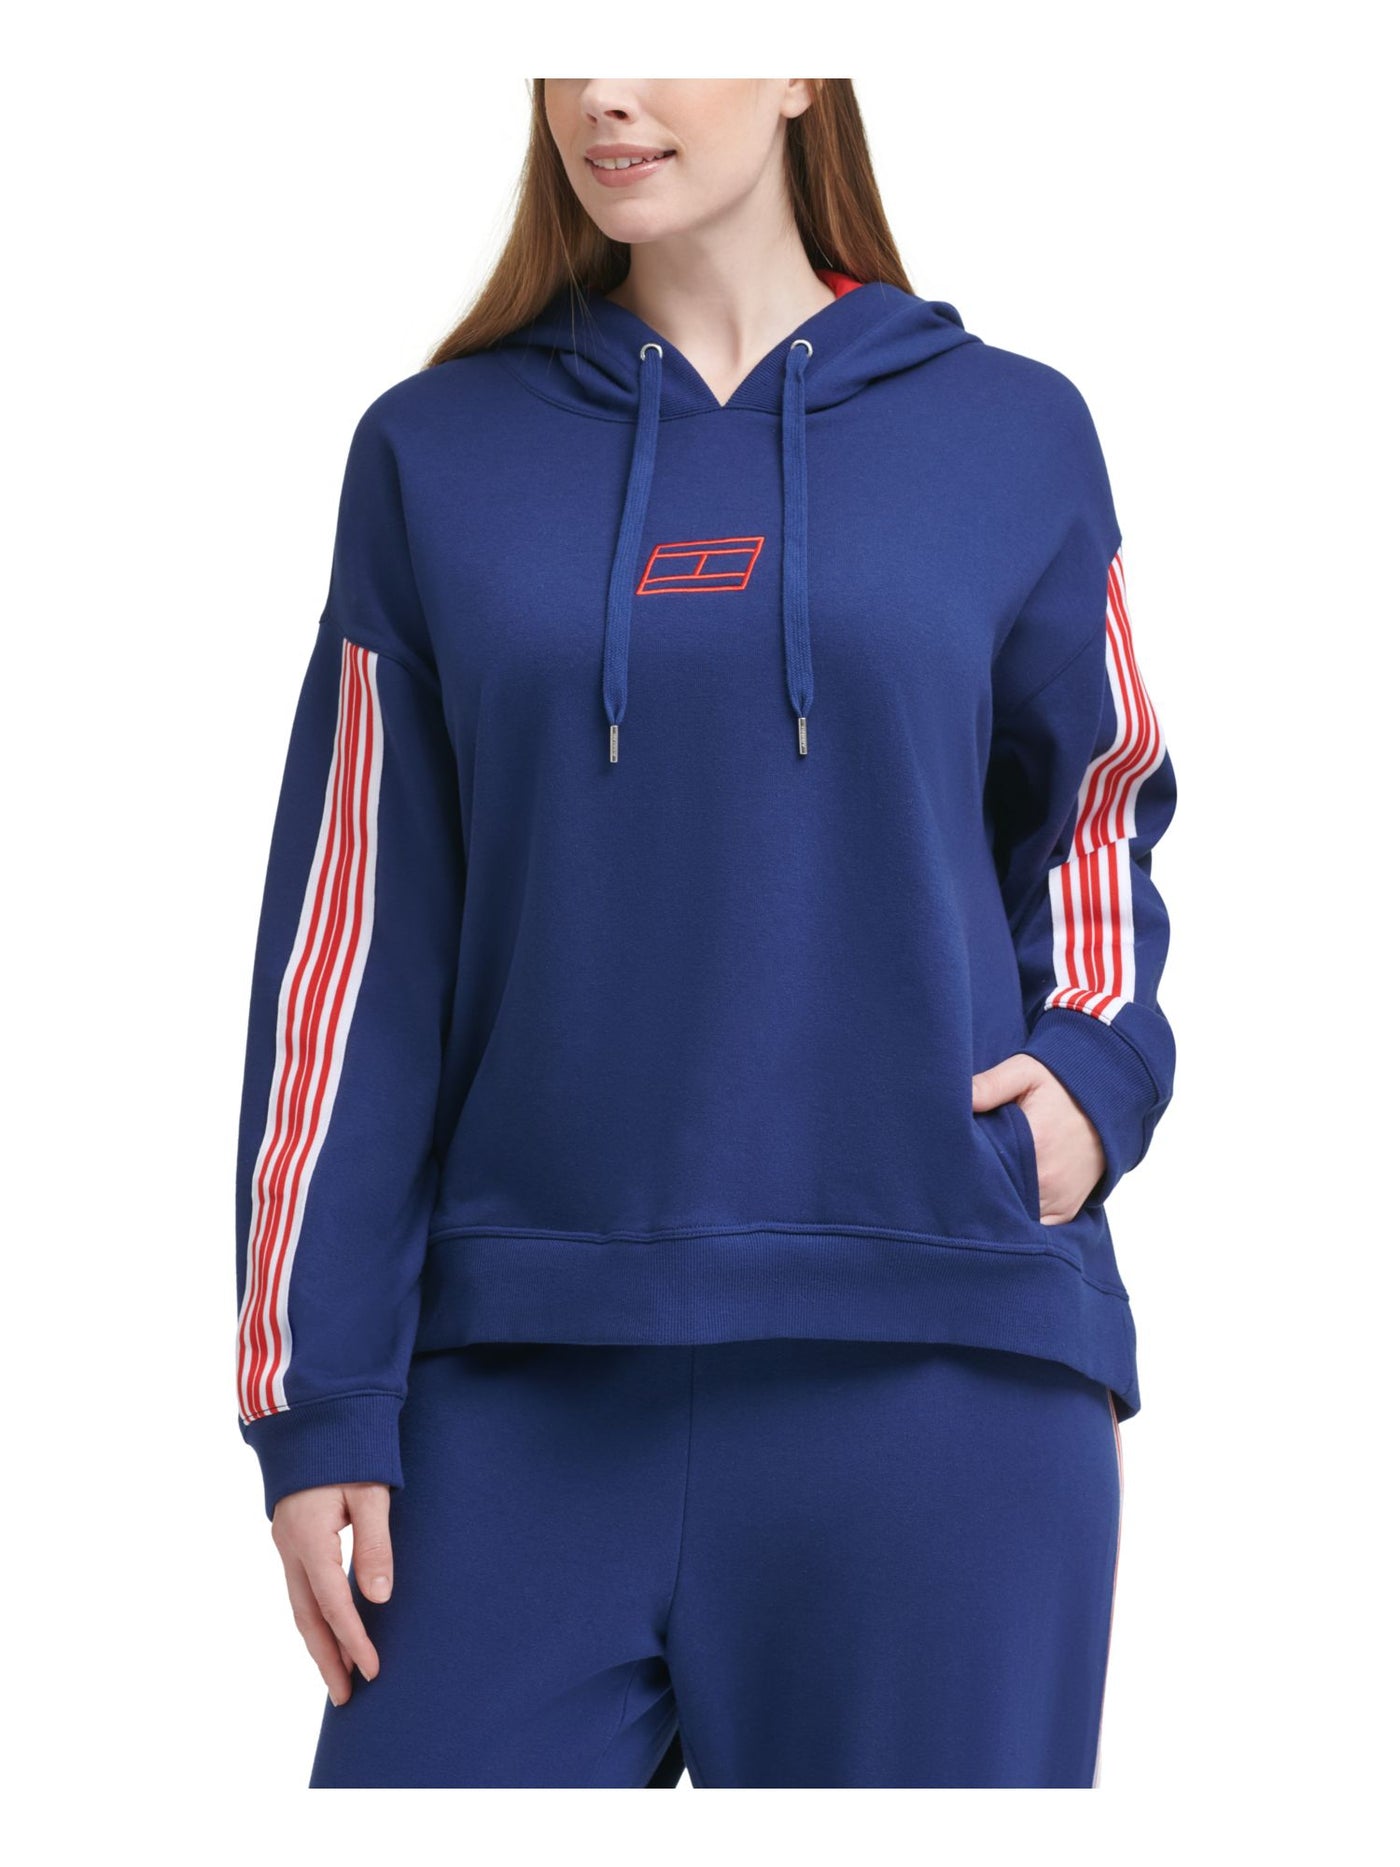 TOMMY HILFIGER SPORT Womens Blue Embroidered Ribbed Drawstring Pocketed Logo Graphic Long Sleeve Active Wear Hoodie Top Plus 0X